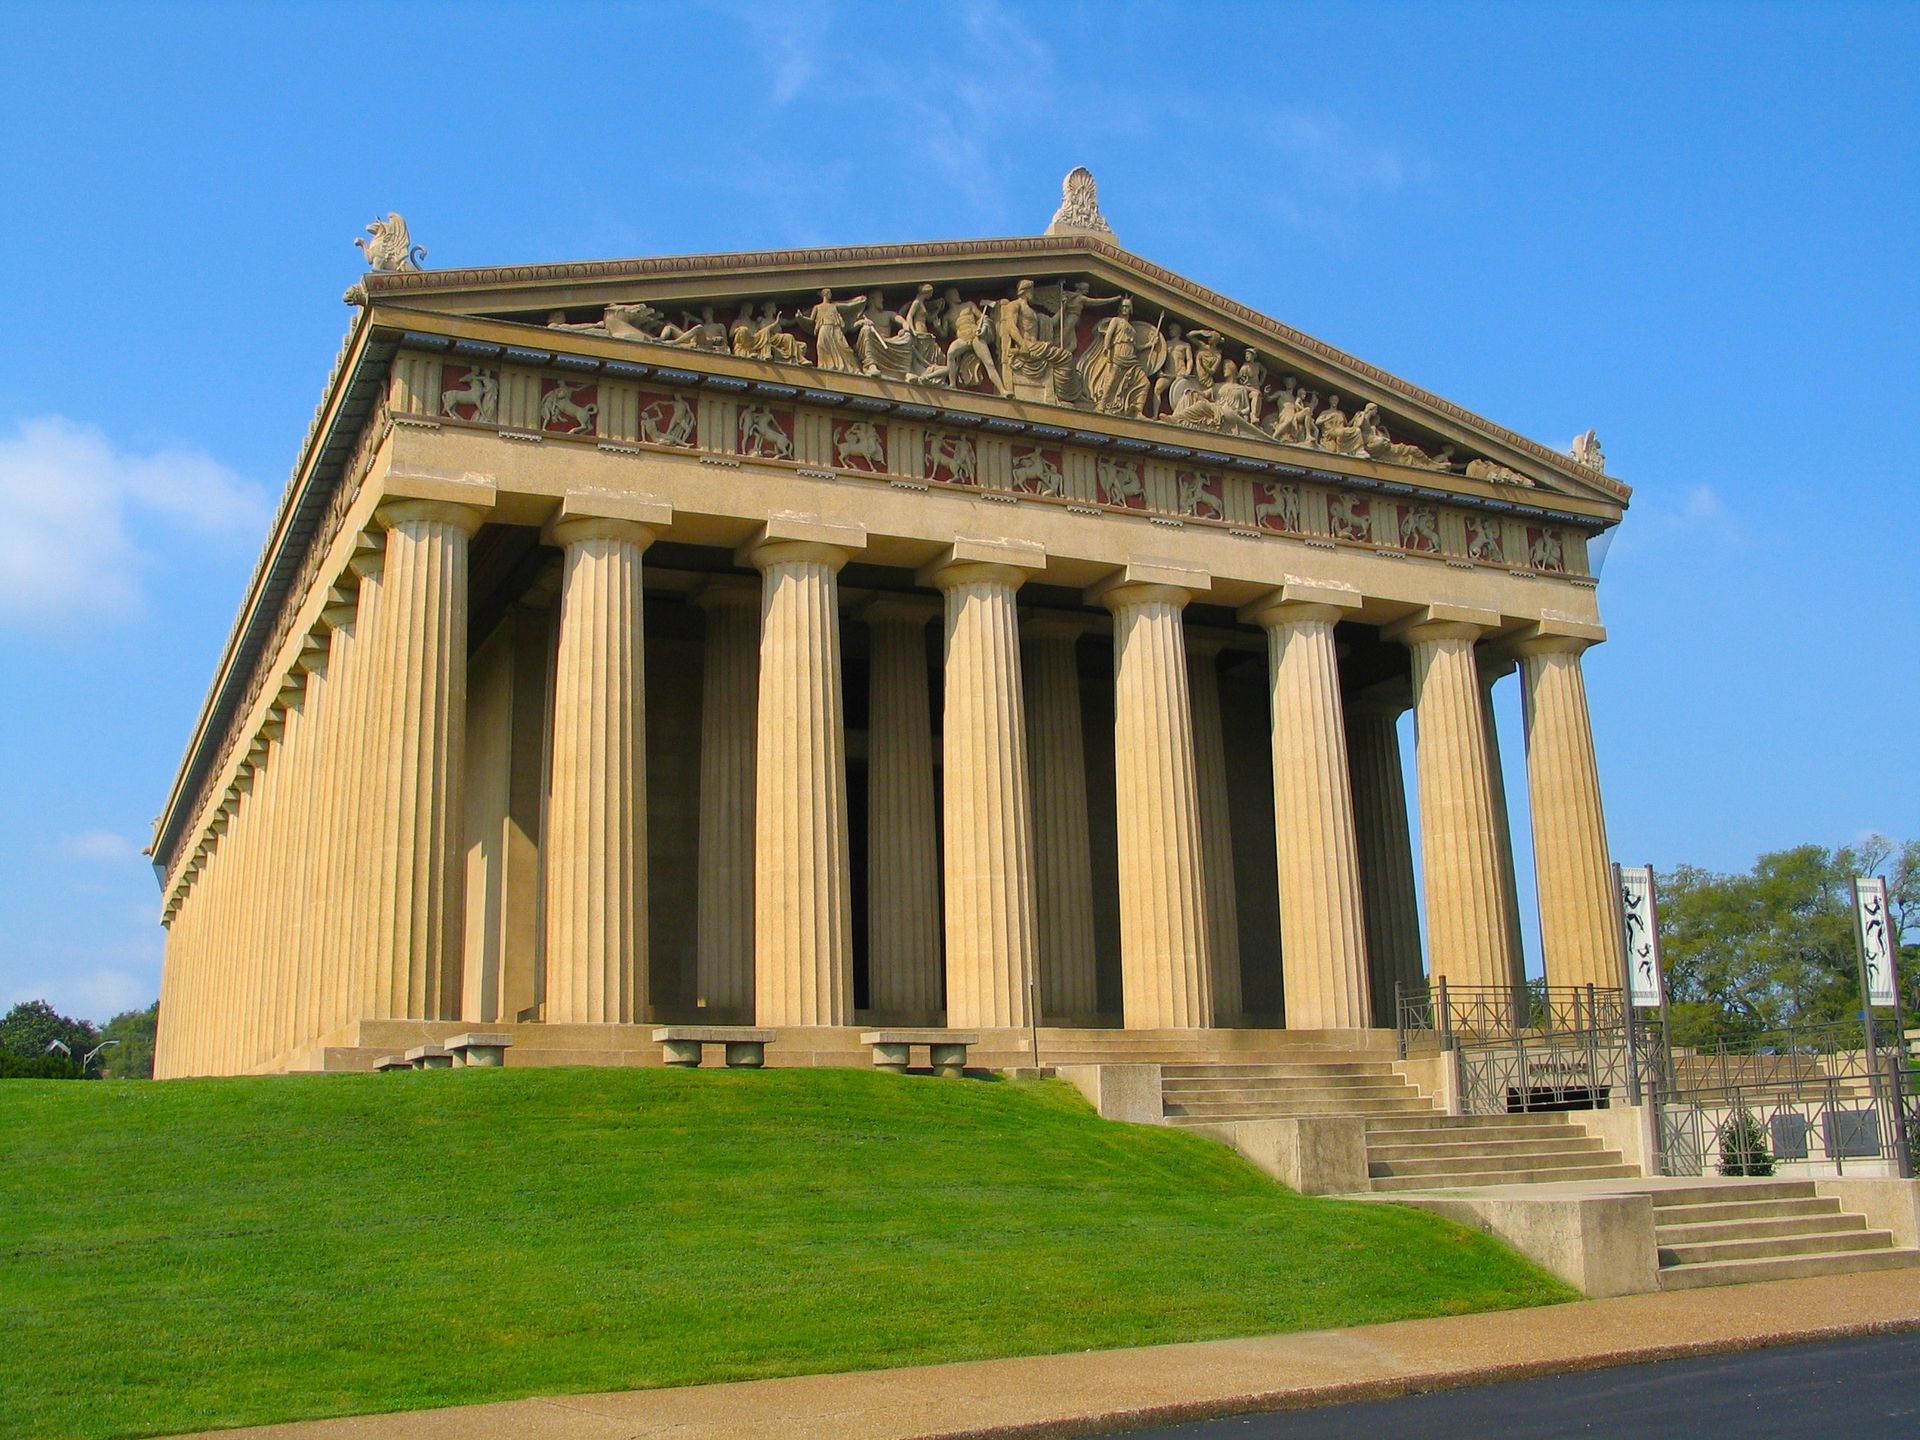 The Parthenon in Nashville, Tennessee.